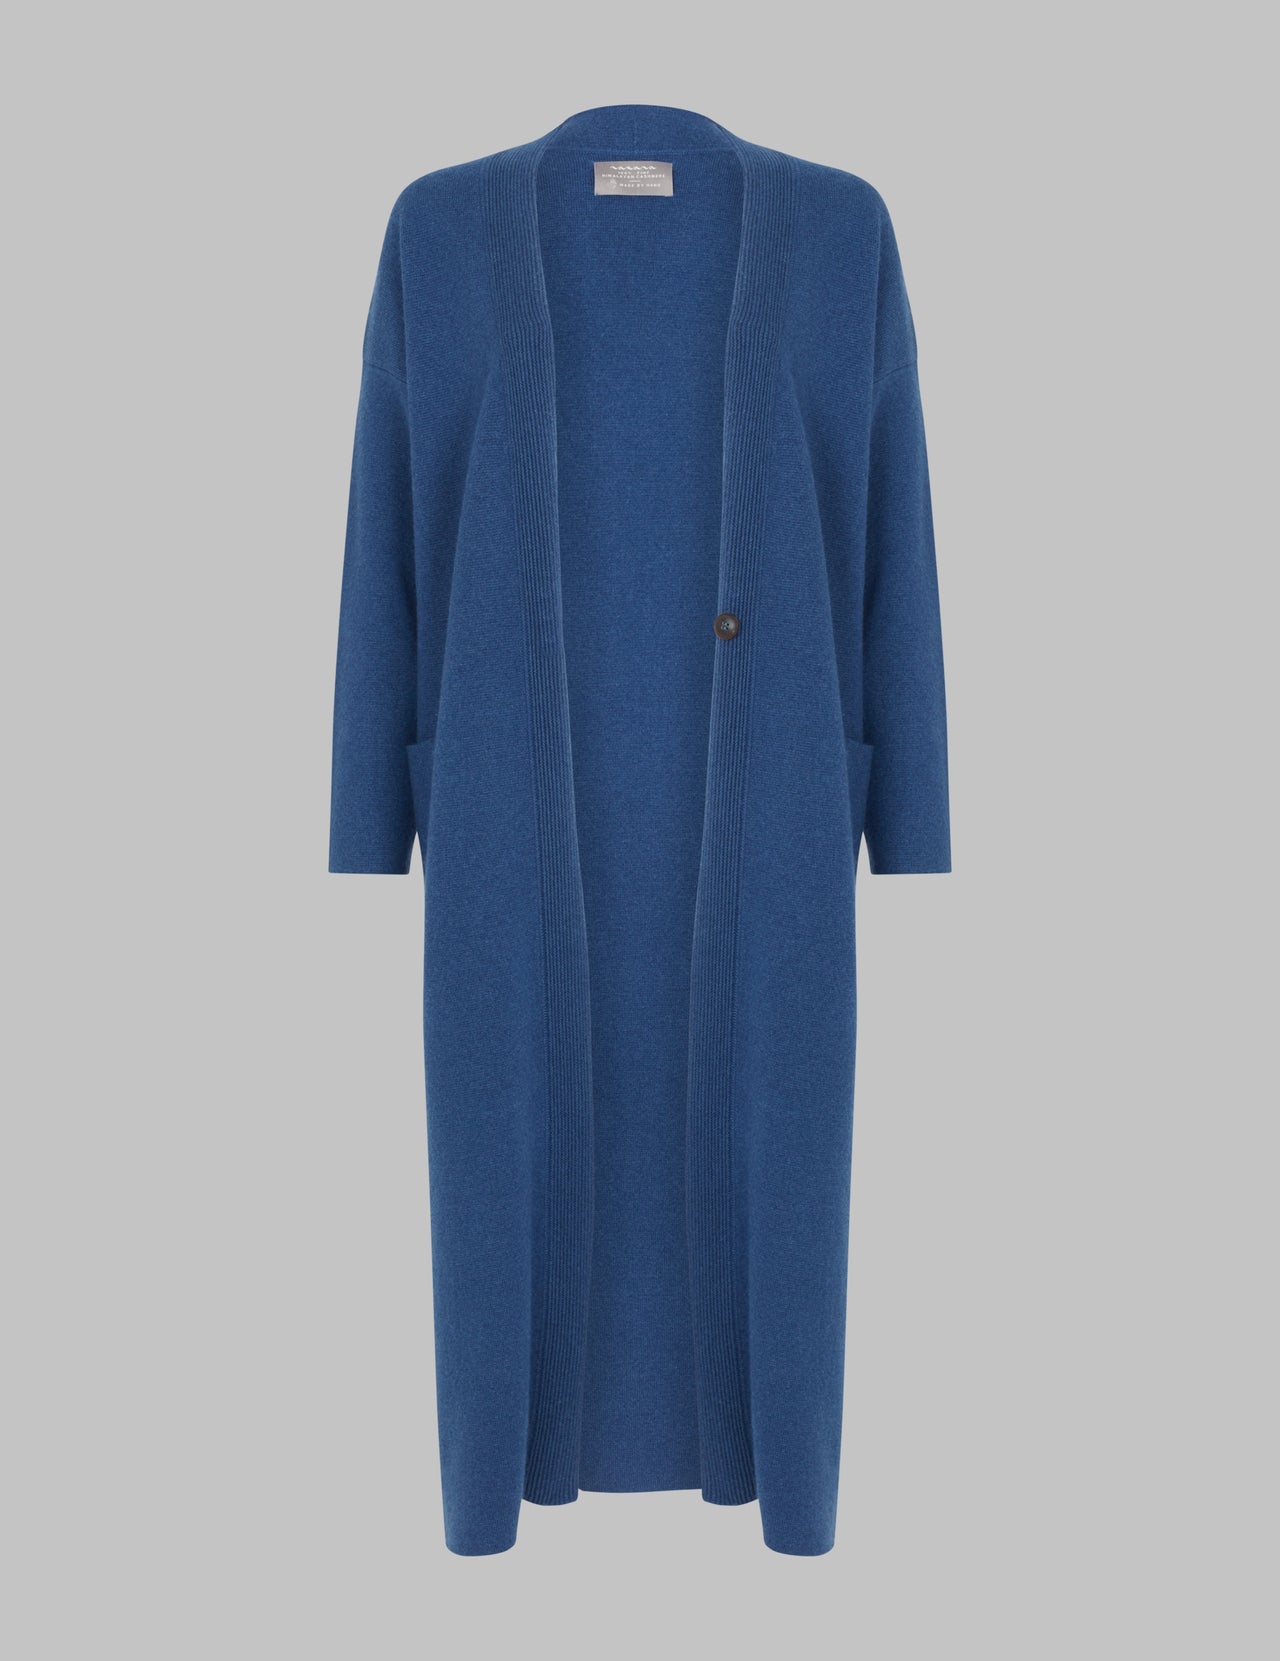  Prussian Blue Long Open Front Cashmere Cardigan | Varana 